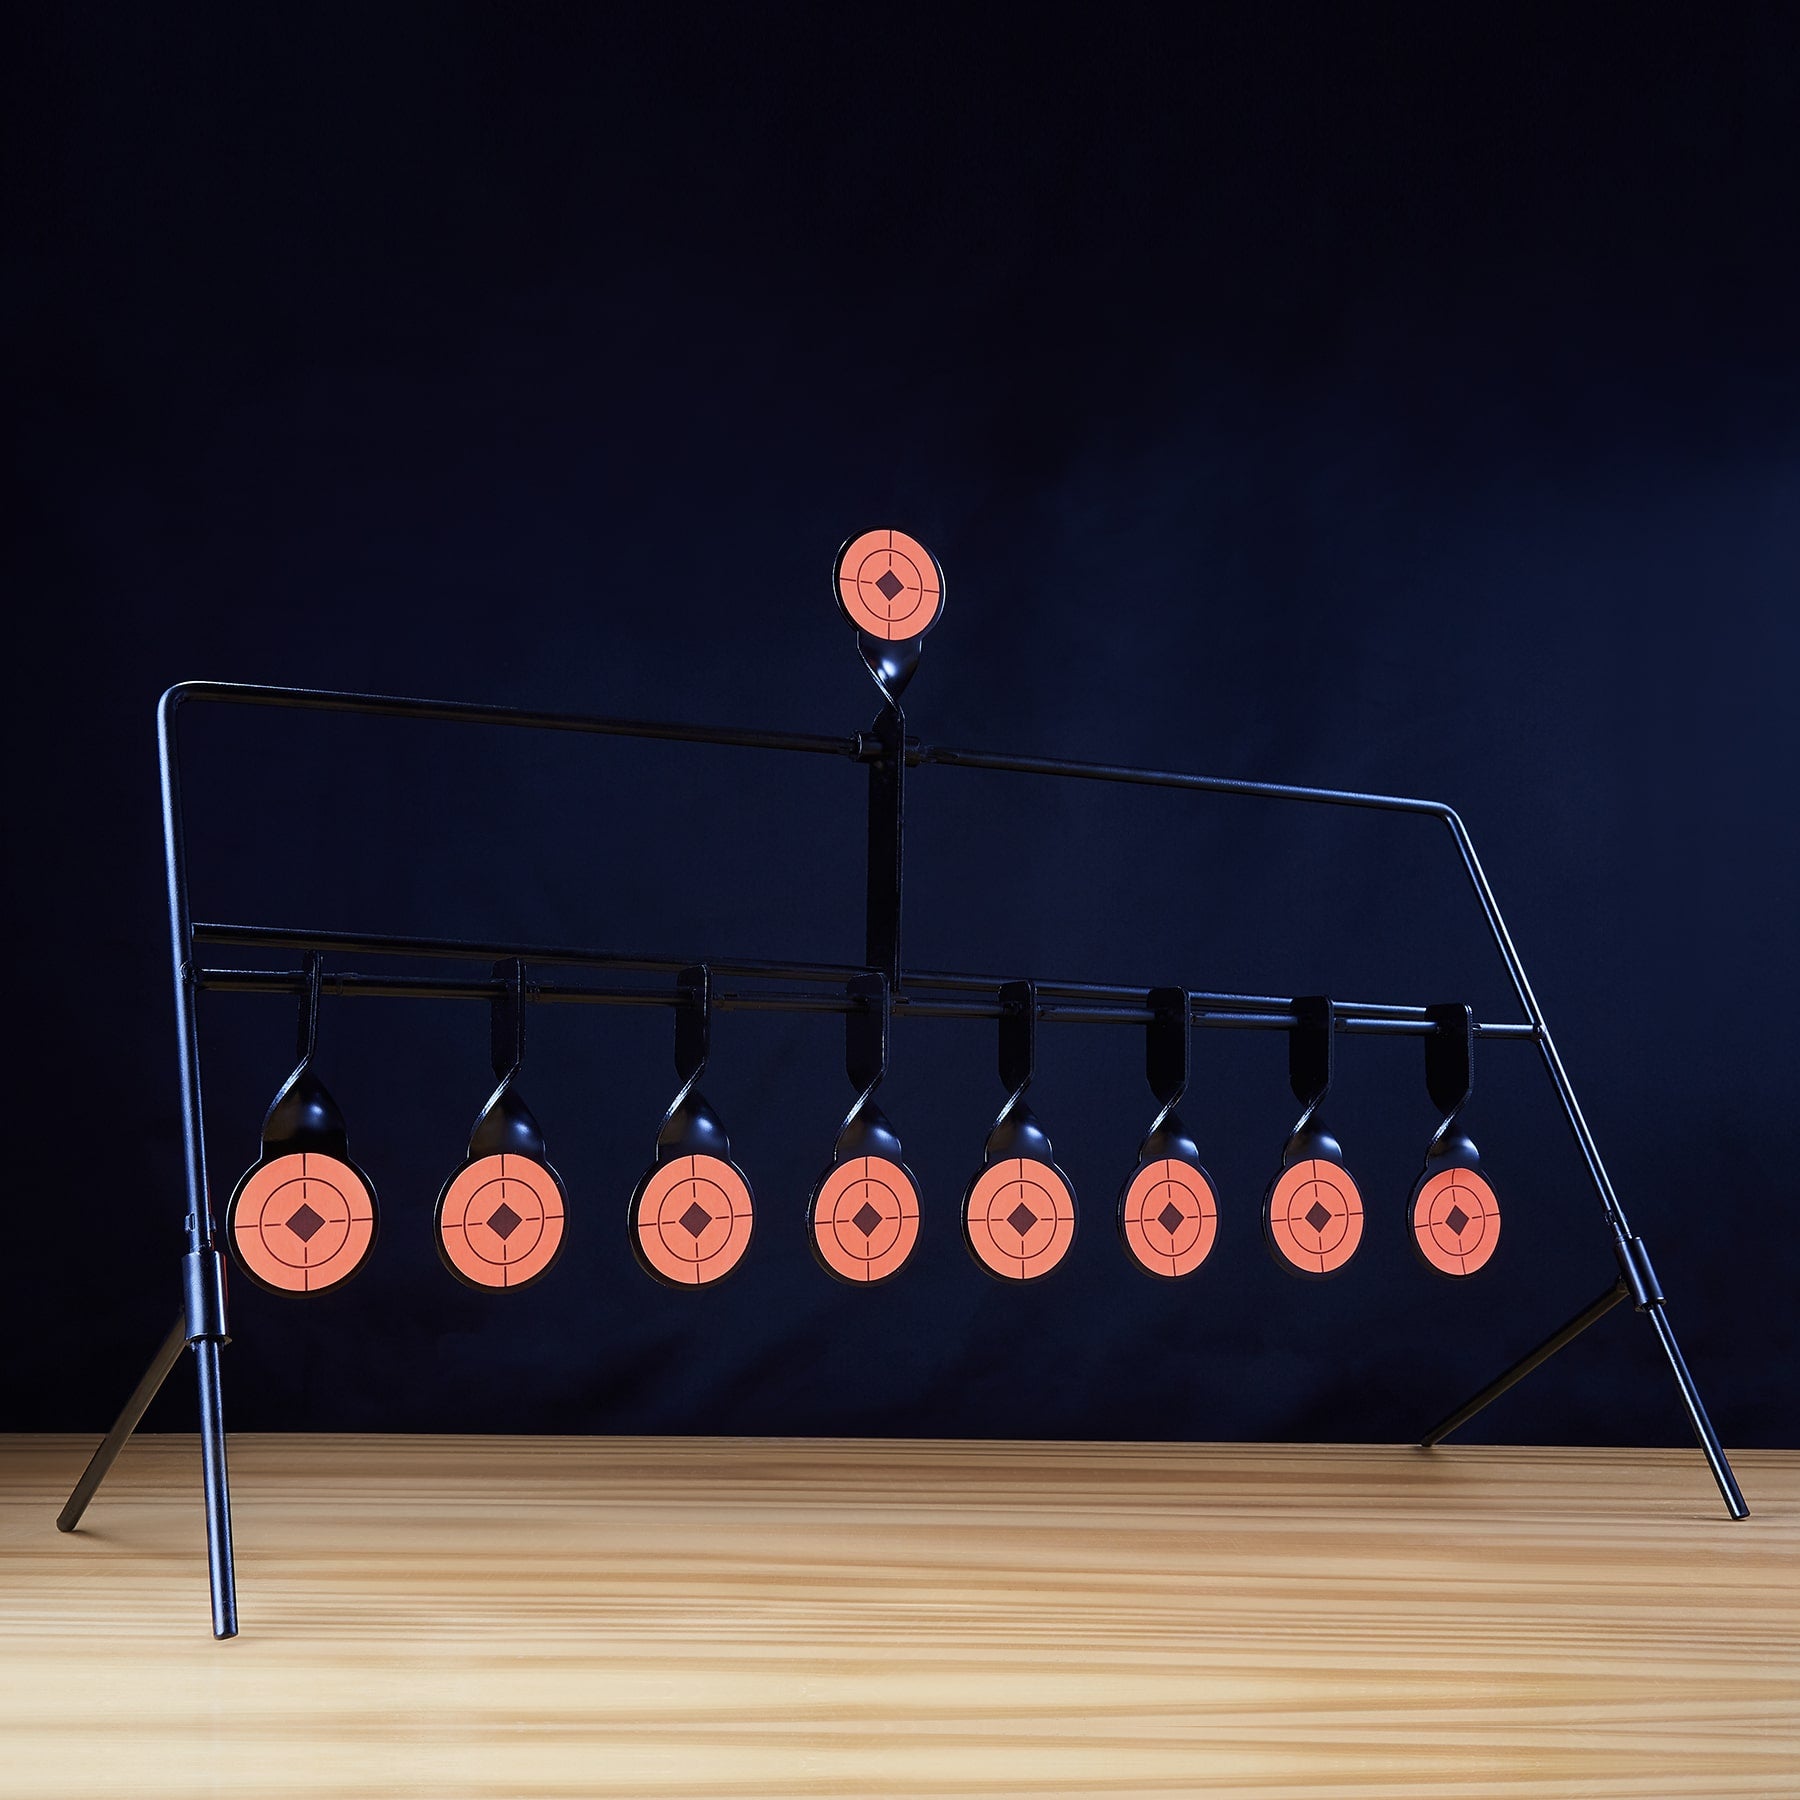 Target Stand with 9 Auto-Resetting Targets